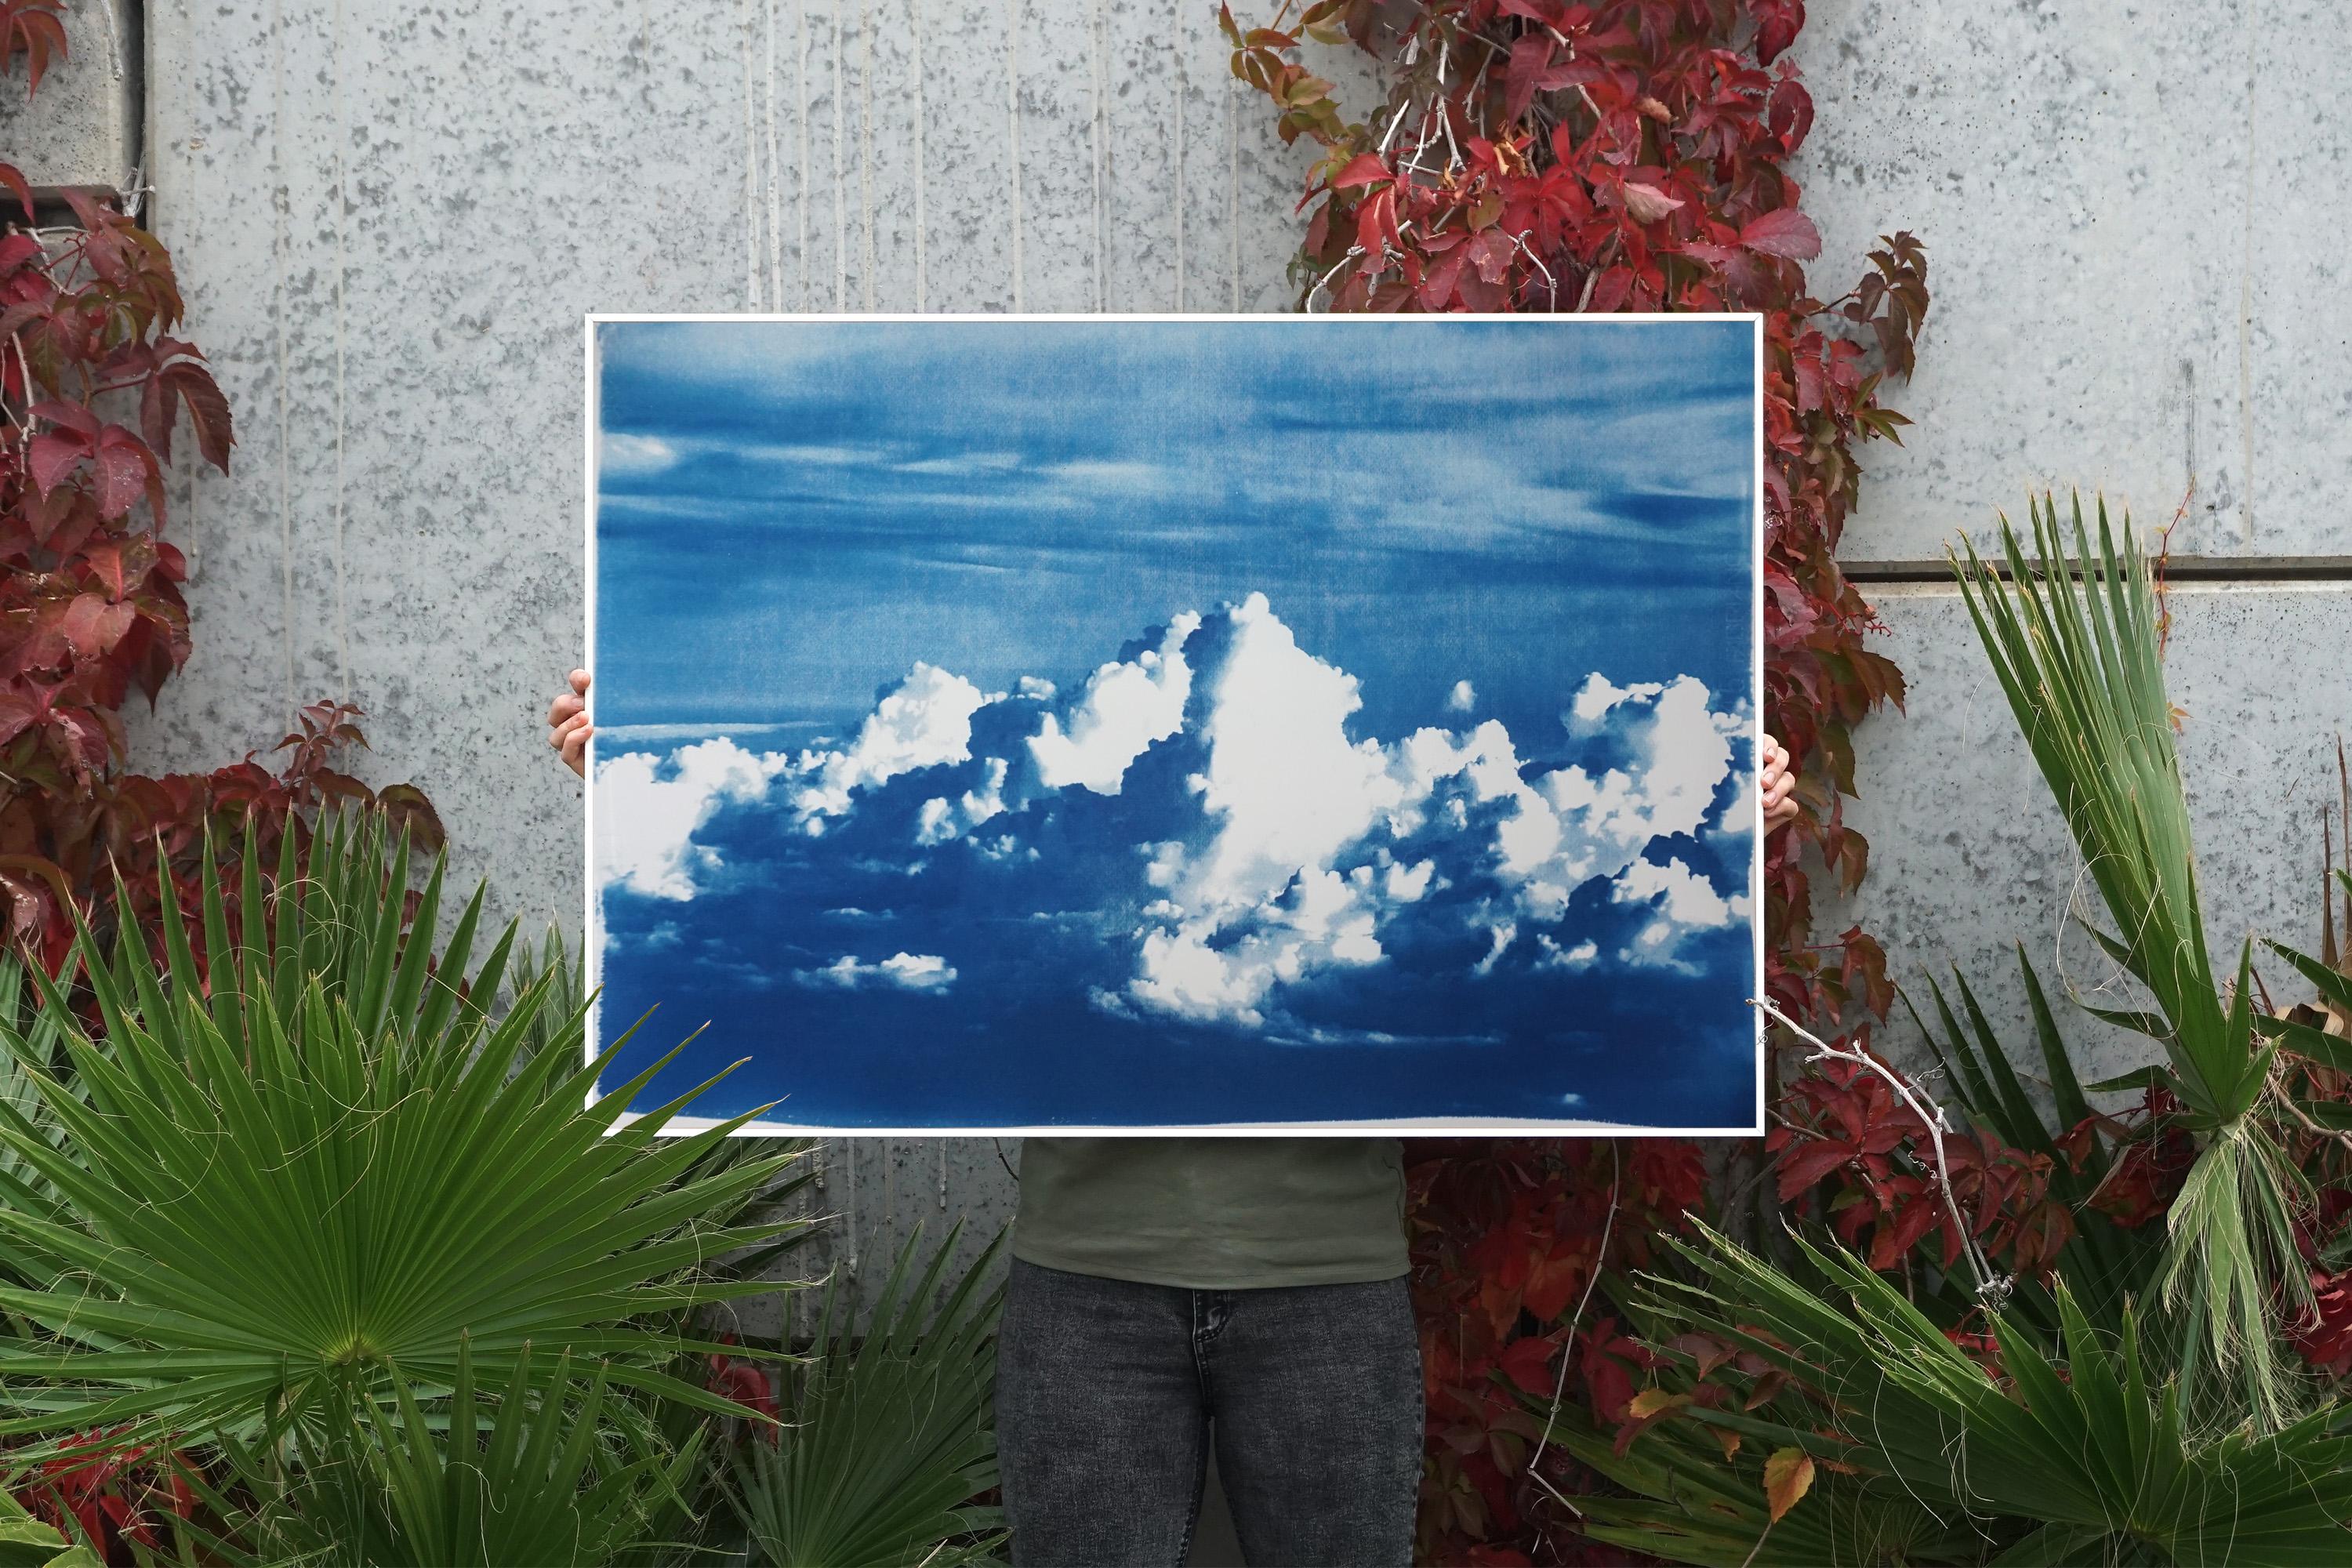 Blustery Clouds After a Storm, Sky Blue Handprinted Cyanotype, Meaningful Scene 1